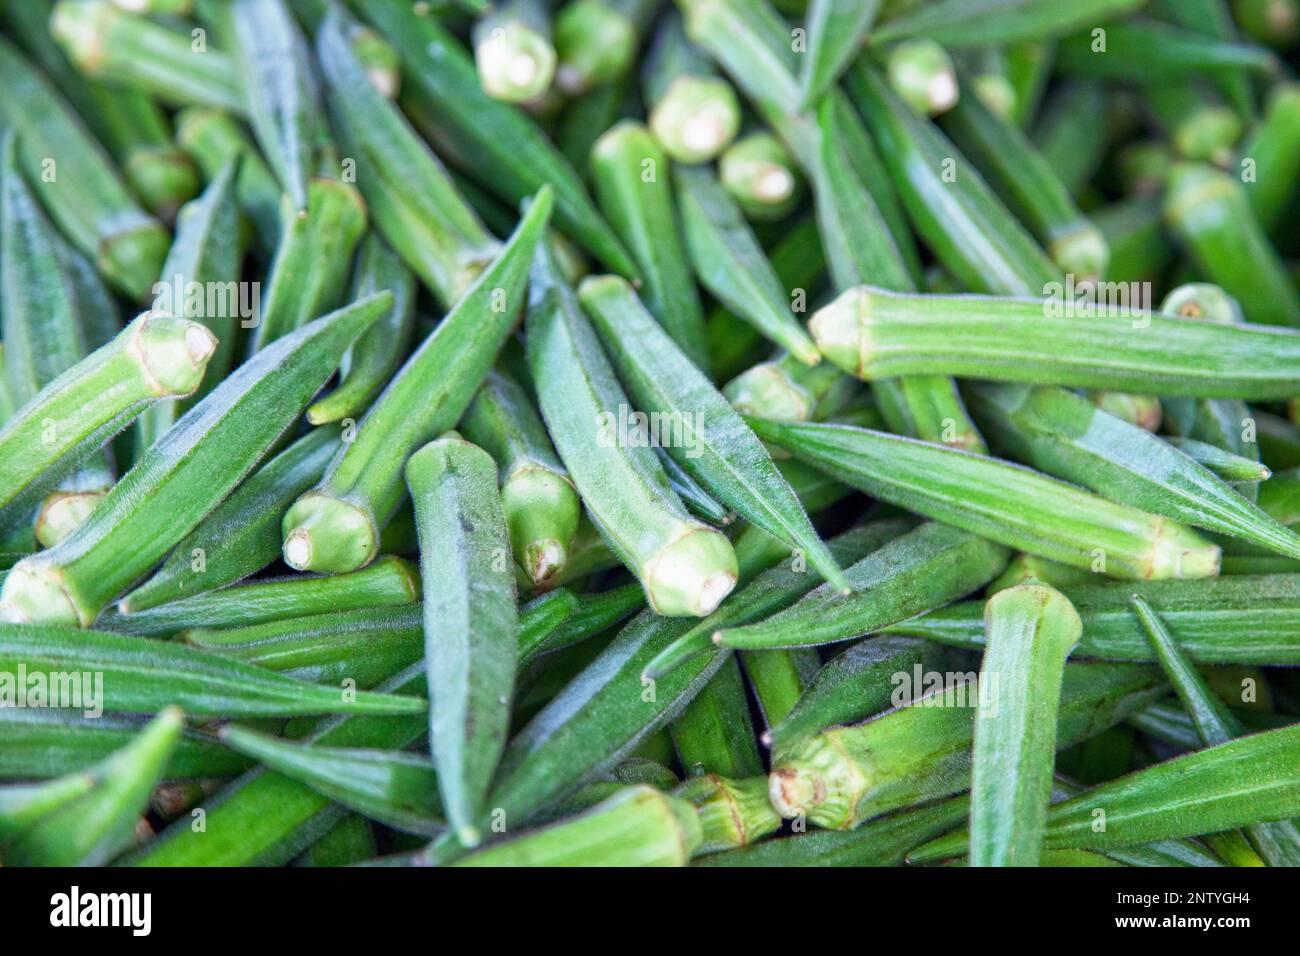 Close-up on a stack of okras for sale on a market stall. Stock Photo